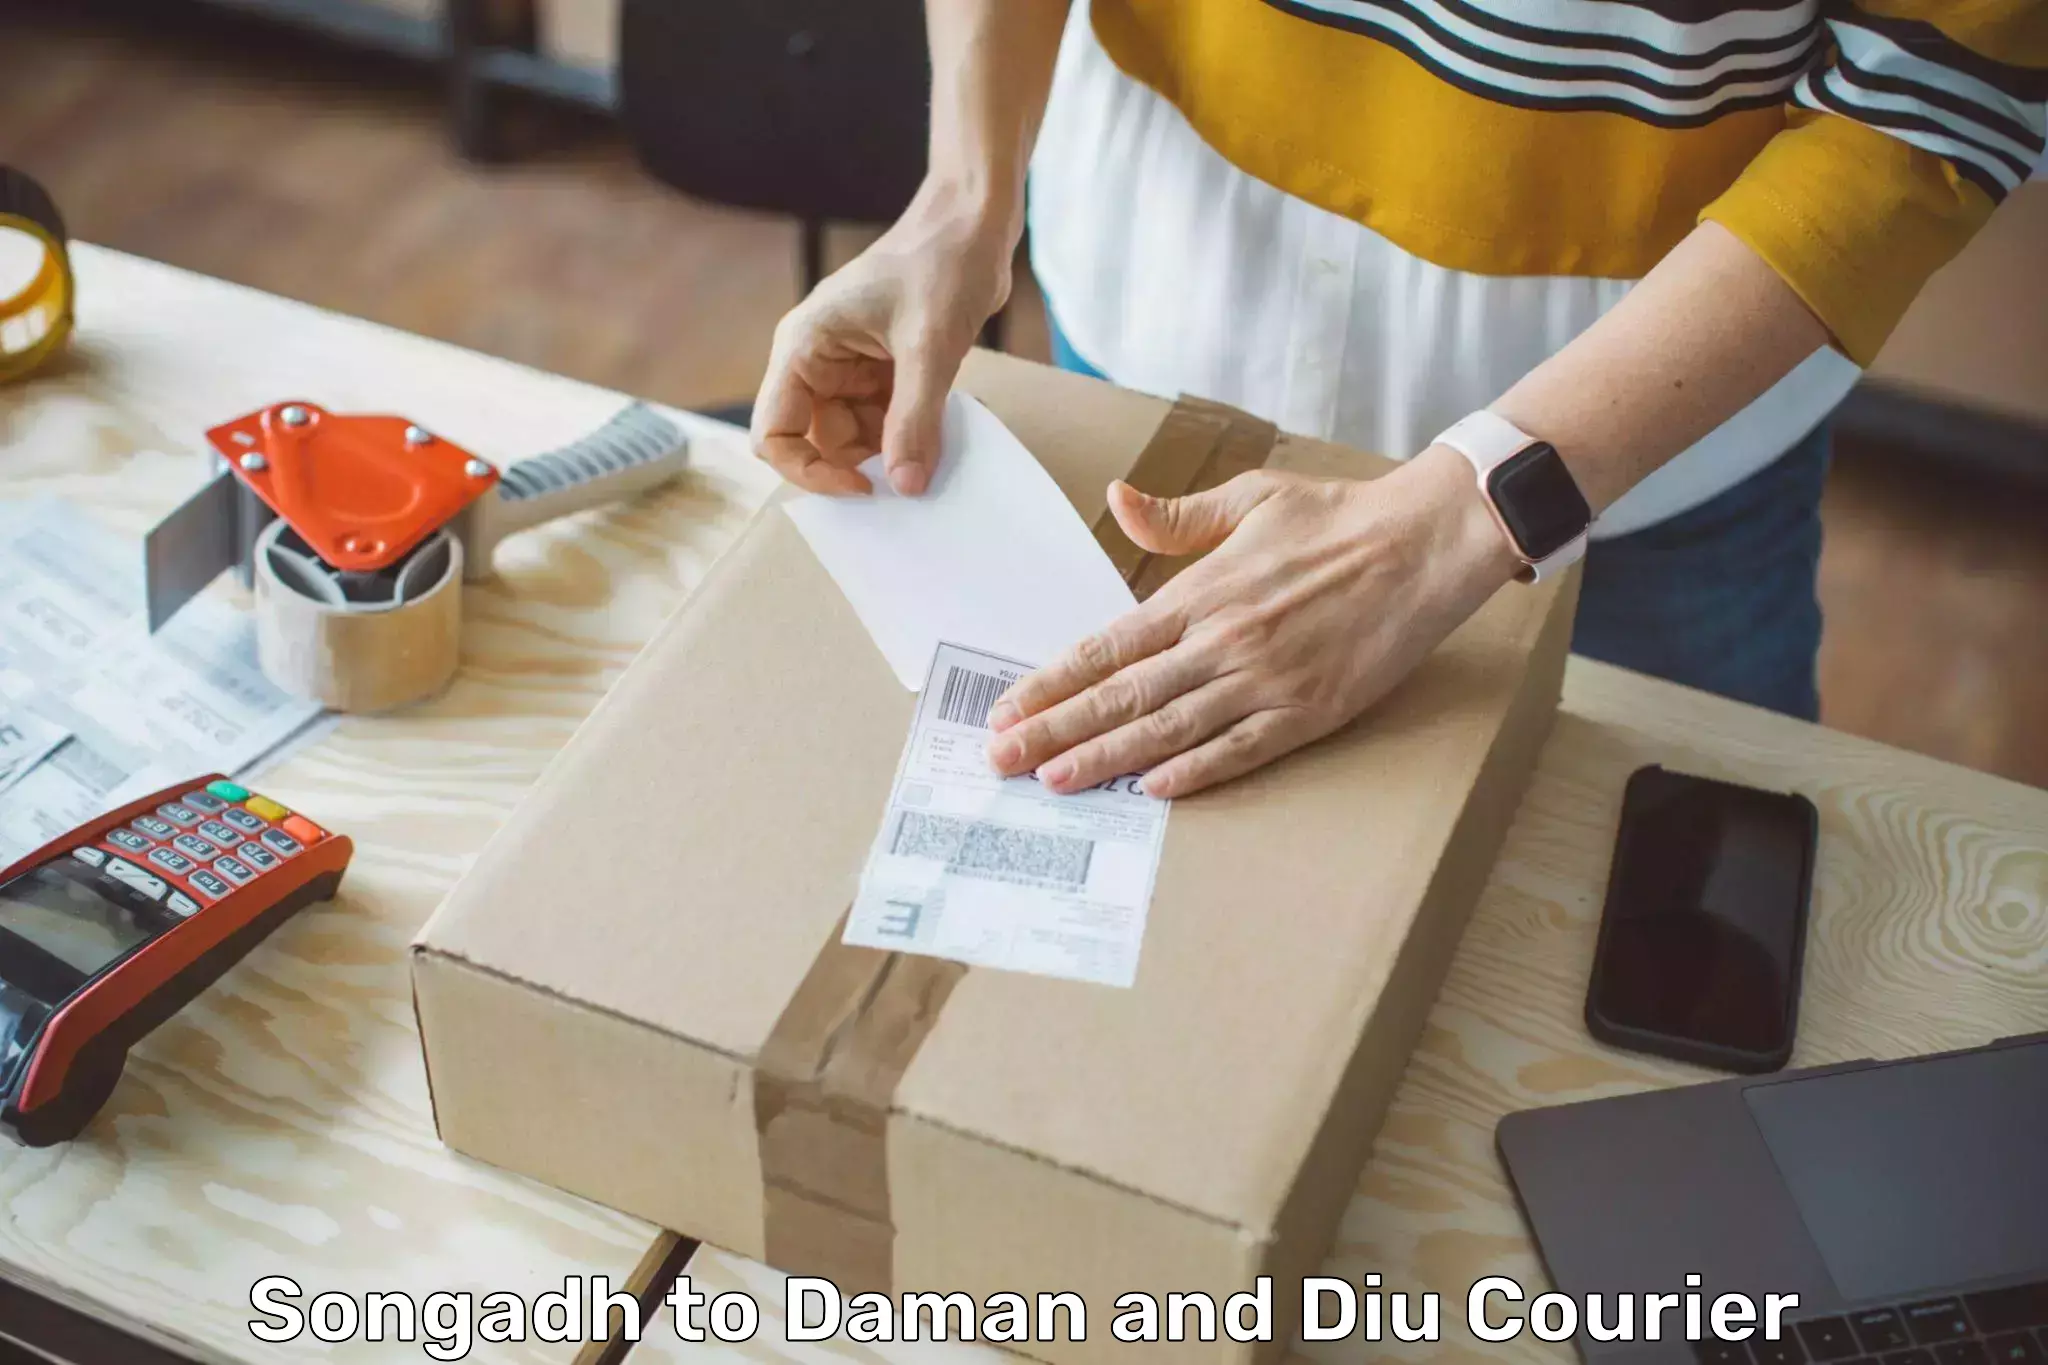 Local courier options Songadh to Daman and Diu